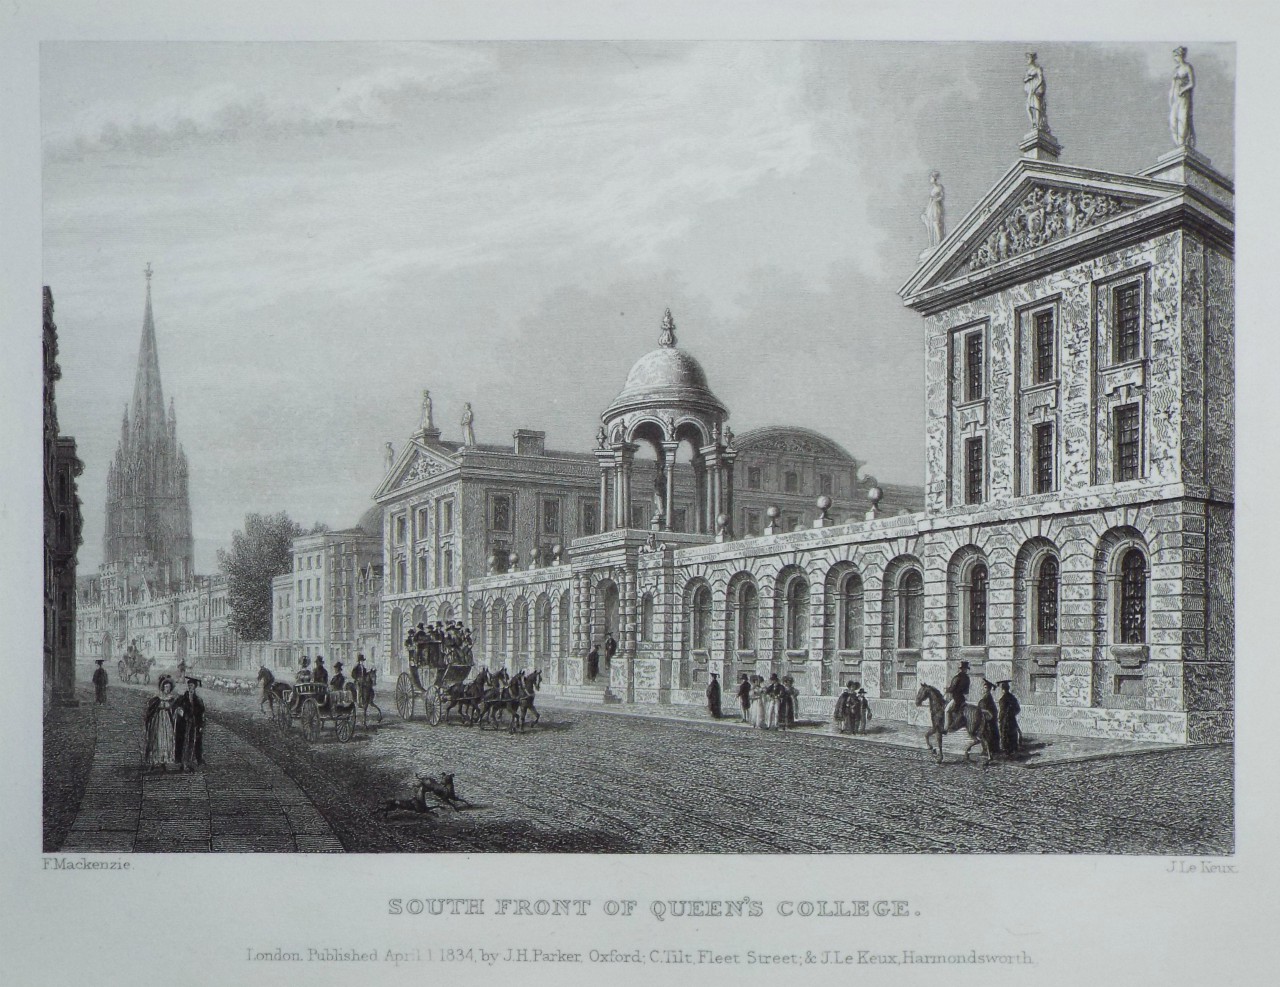 Print - South Front of Queen's College. - Le